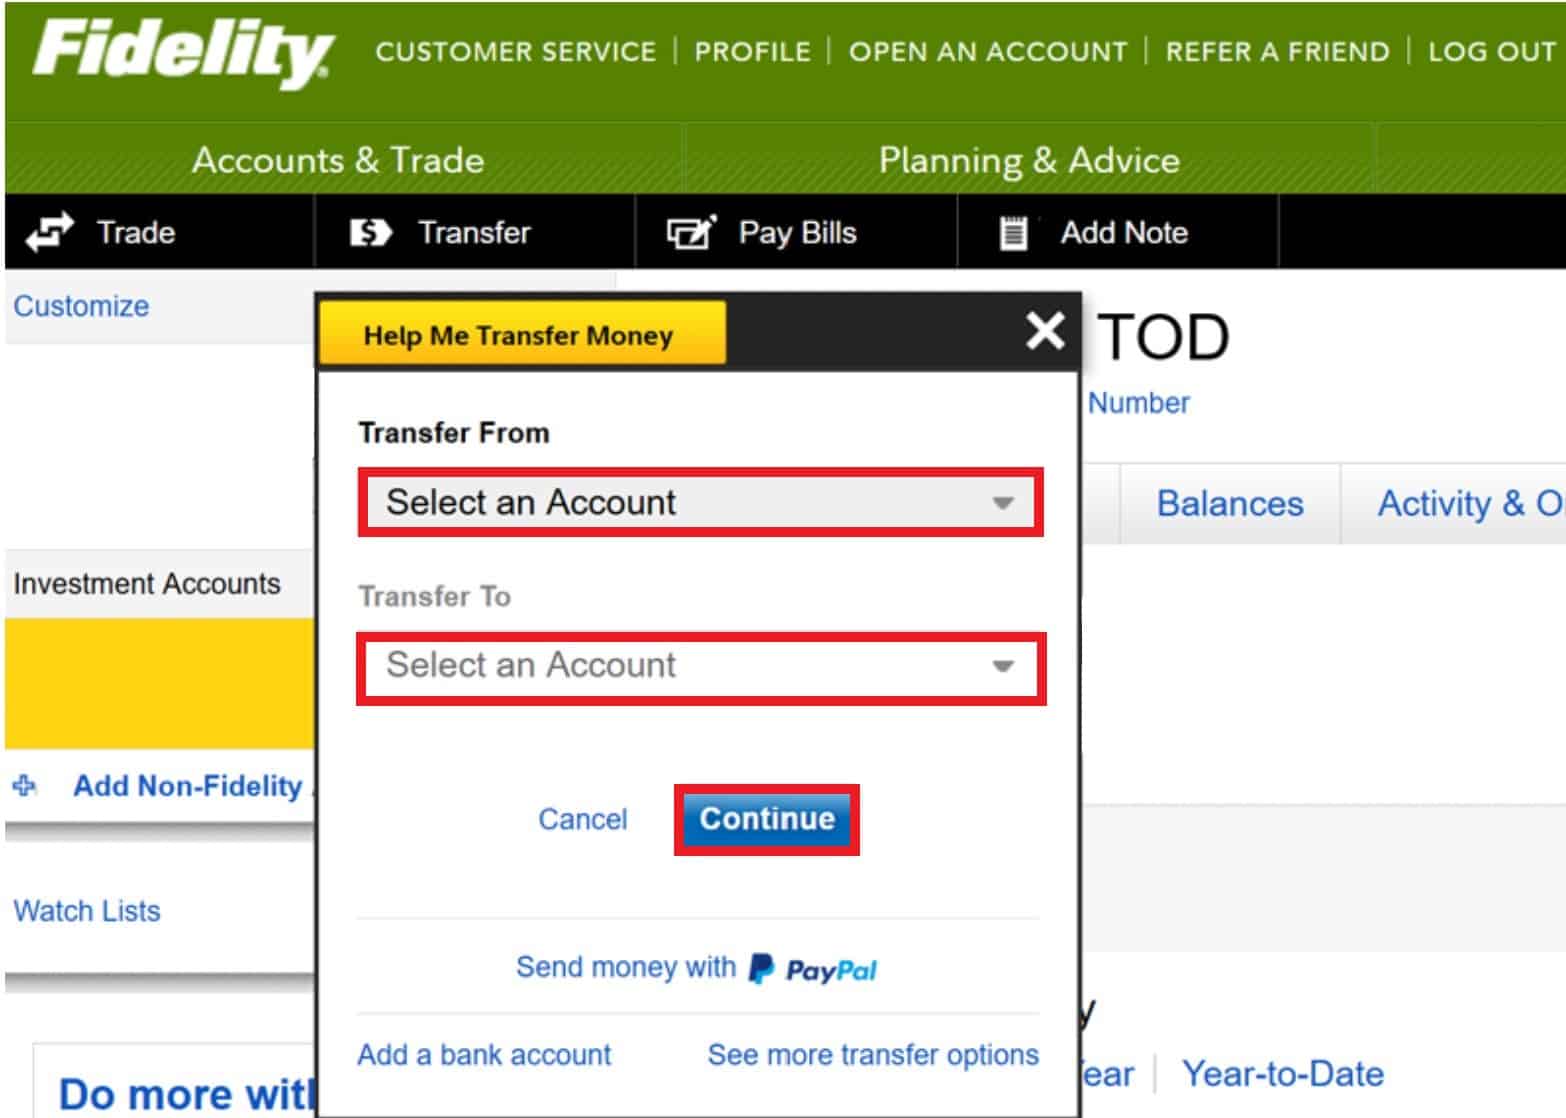 select the account in Transfer From and Transfer To